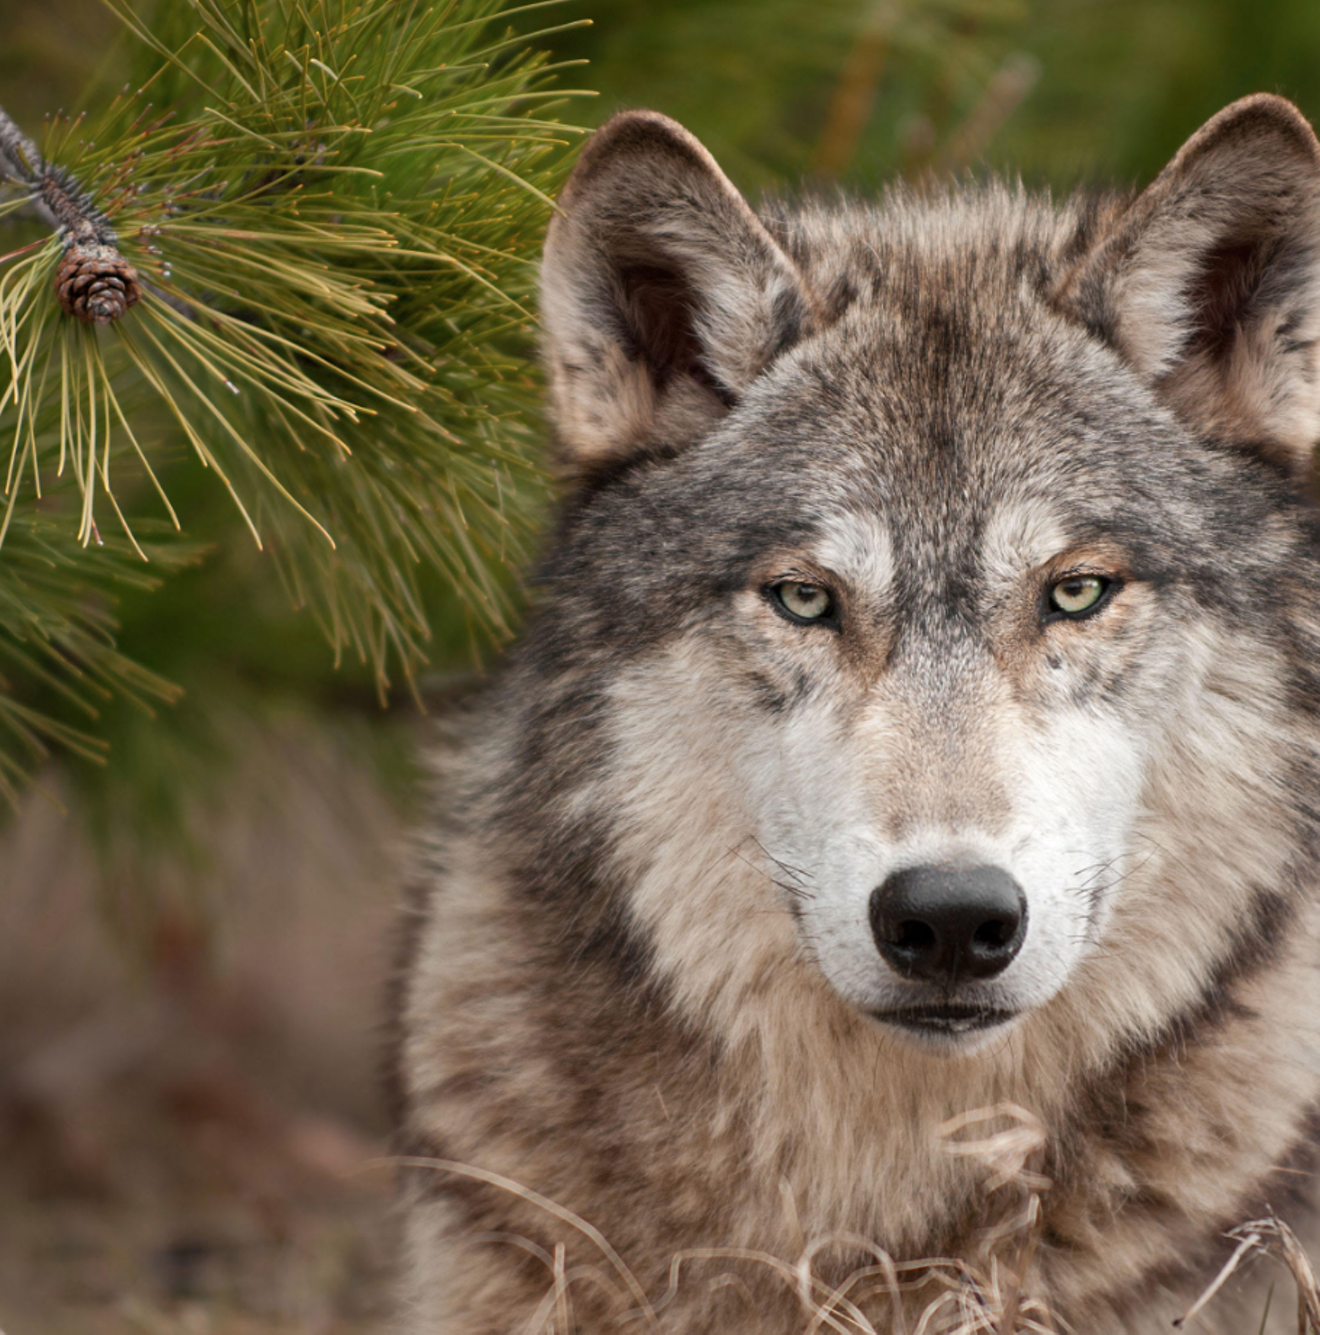 Wolf reintroduction was the goal of Proposition 114, which was passed by Coloradans in November 2020.